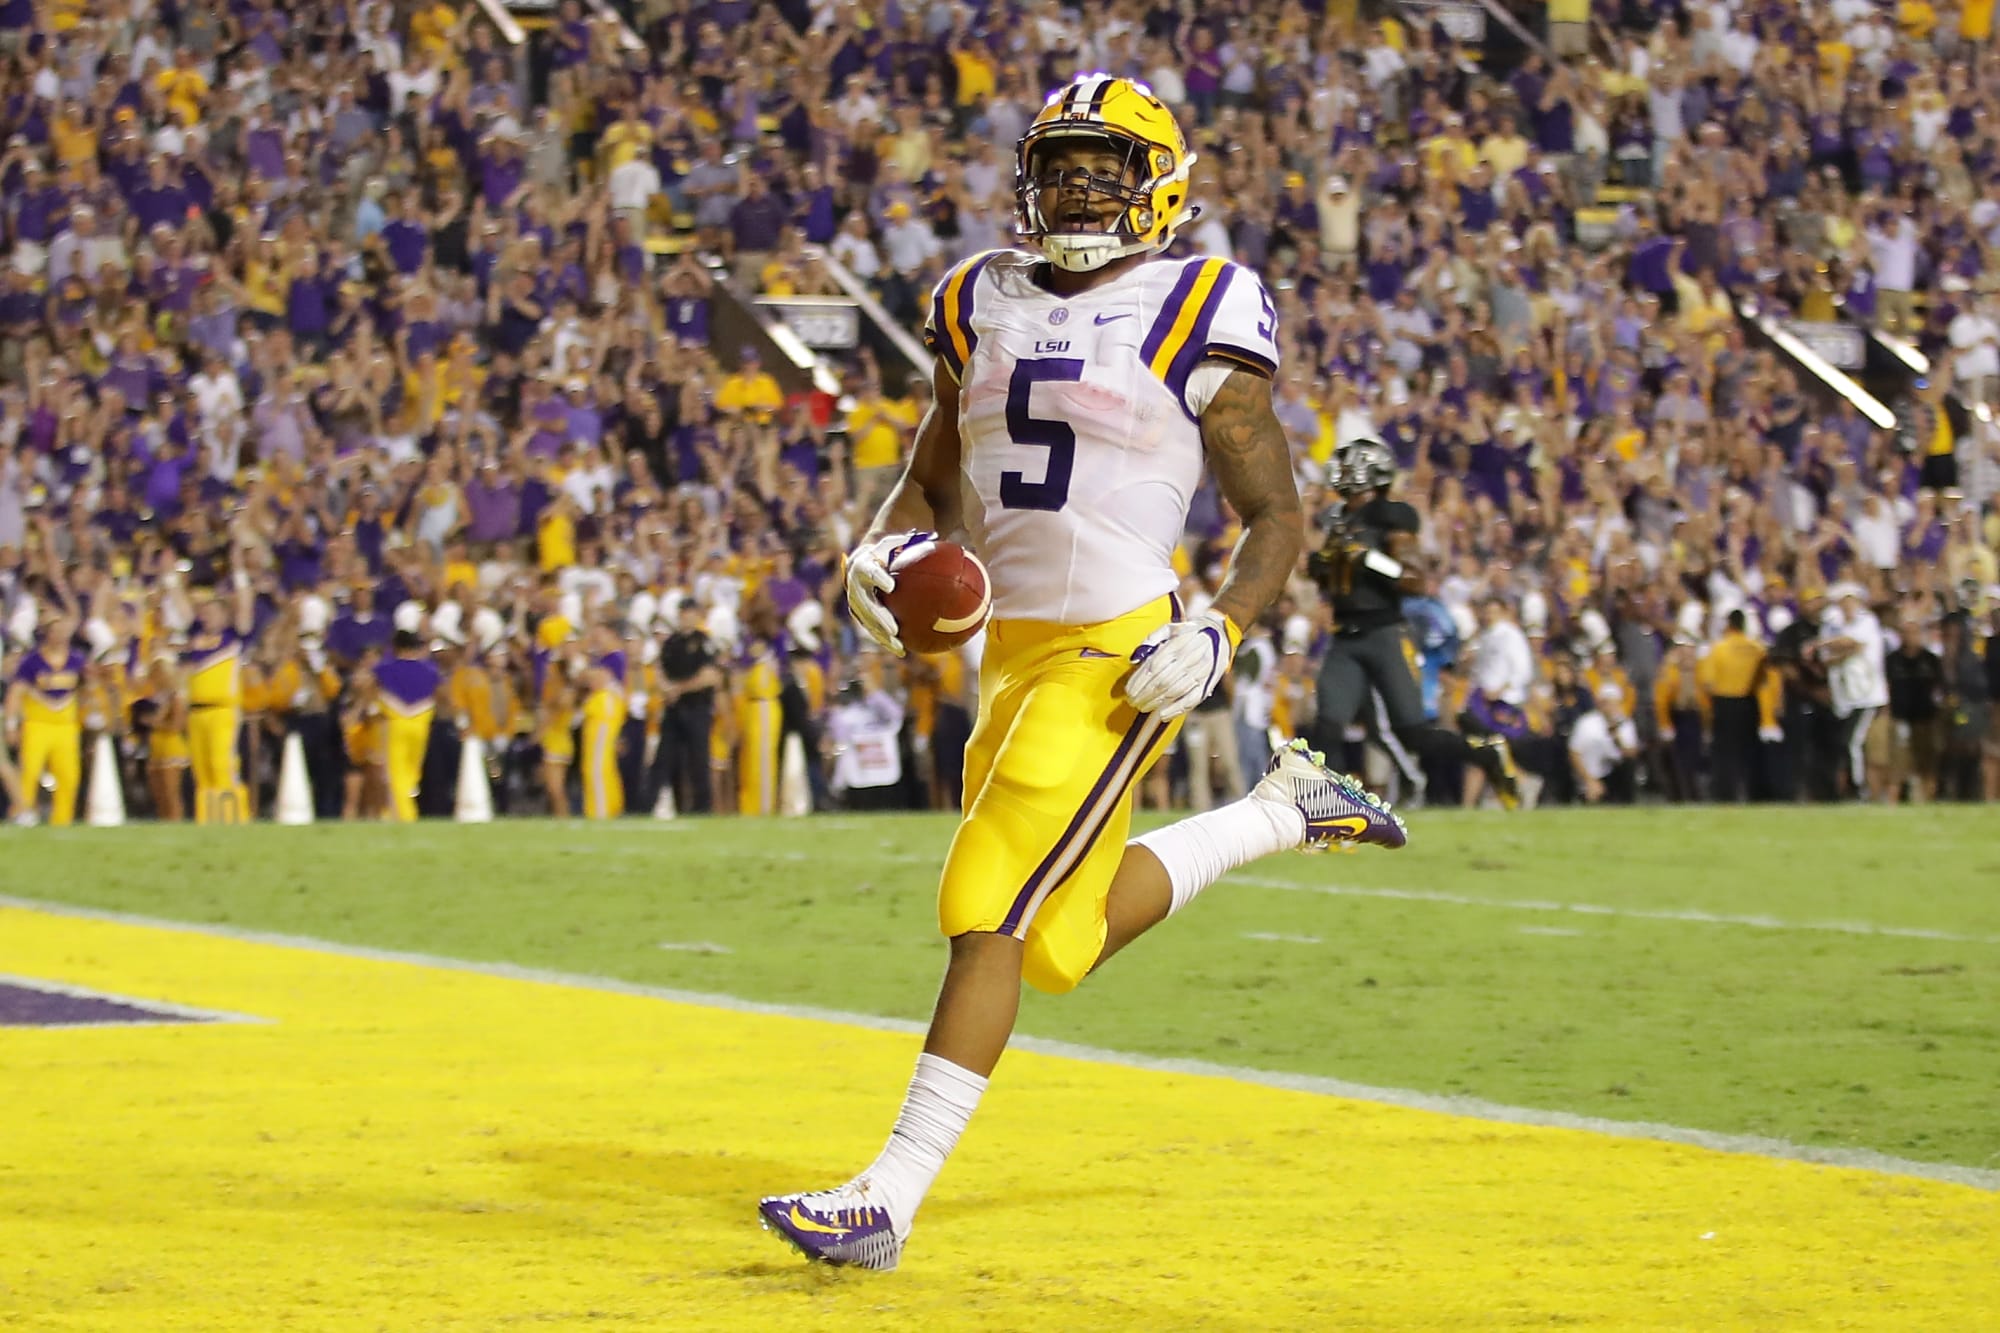 LSU Football 5 reasons why Tigers will win the 2017 national title